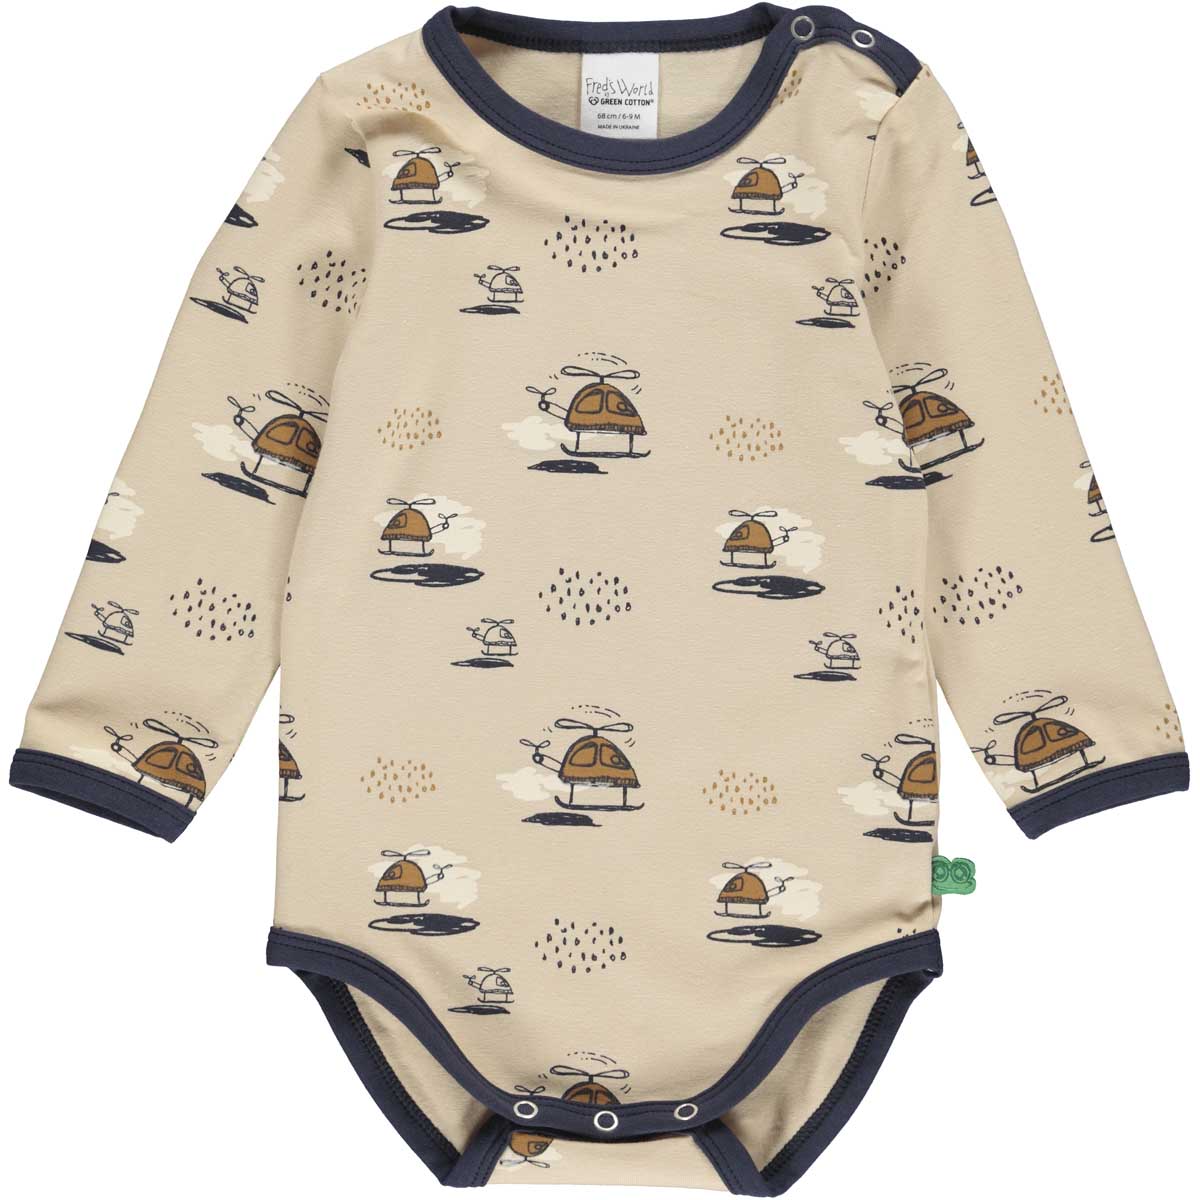 Fred's World organic Long-sleeve bodysuit- helicopter print